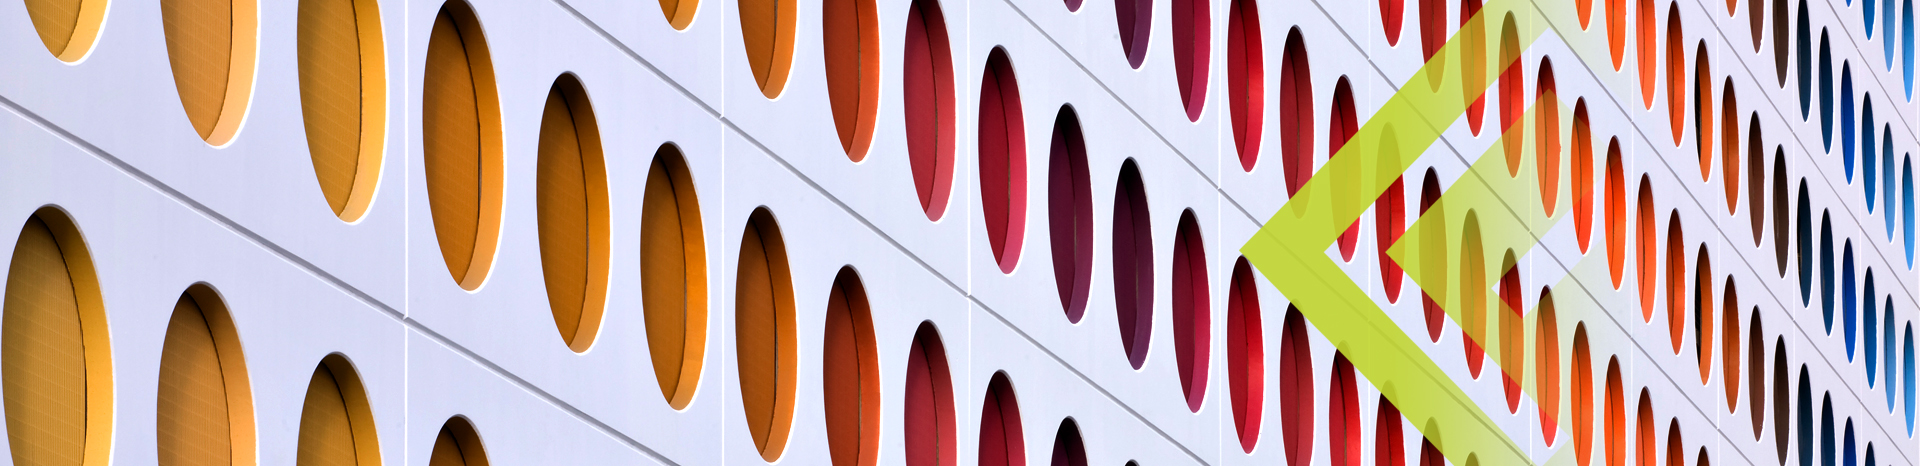 an abstract image showing the side of a silver building with an interesting design created by different coloured circles carved into the wall?height=270